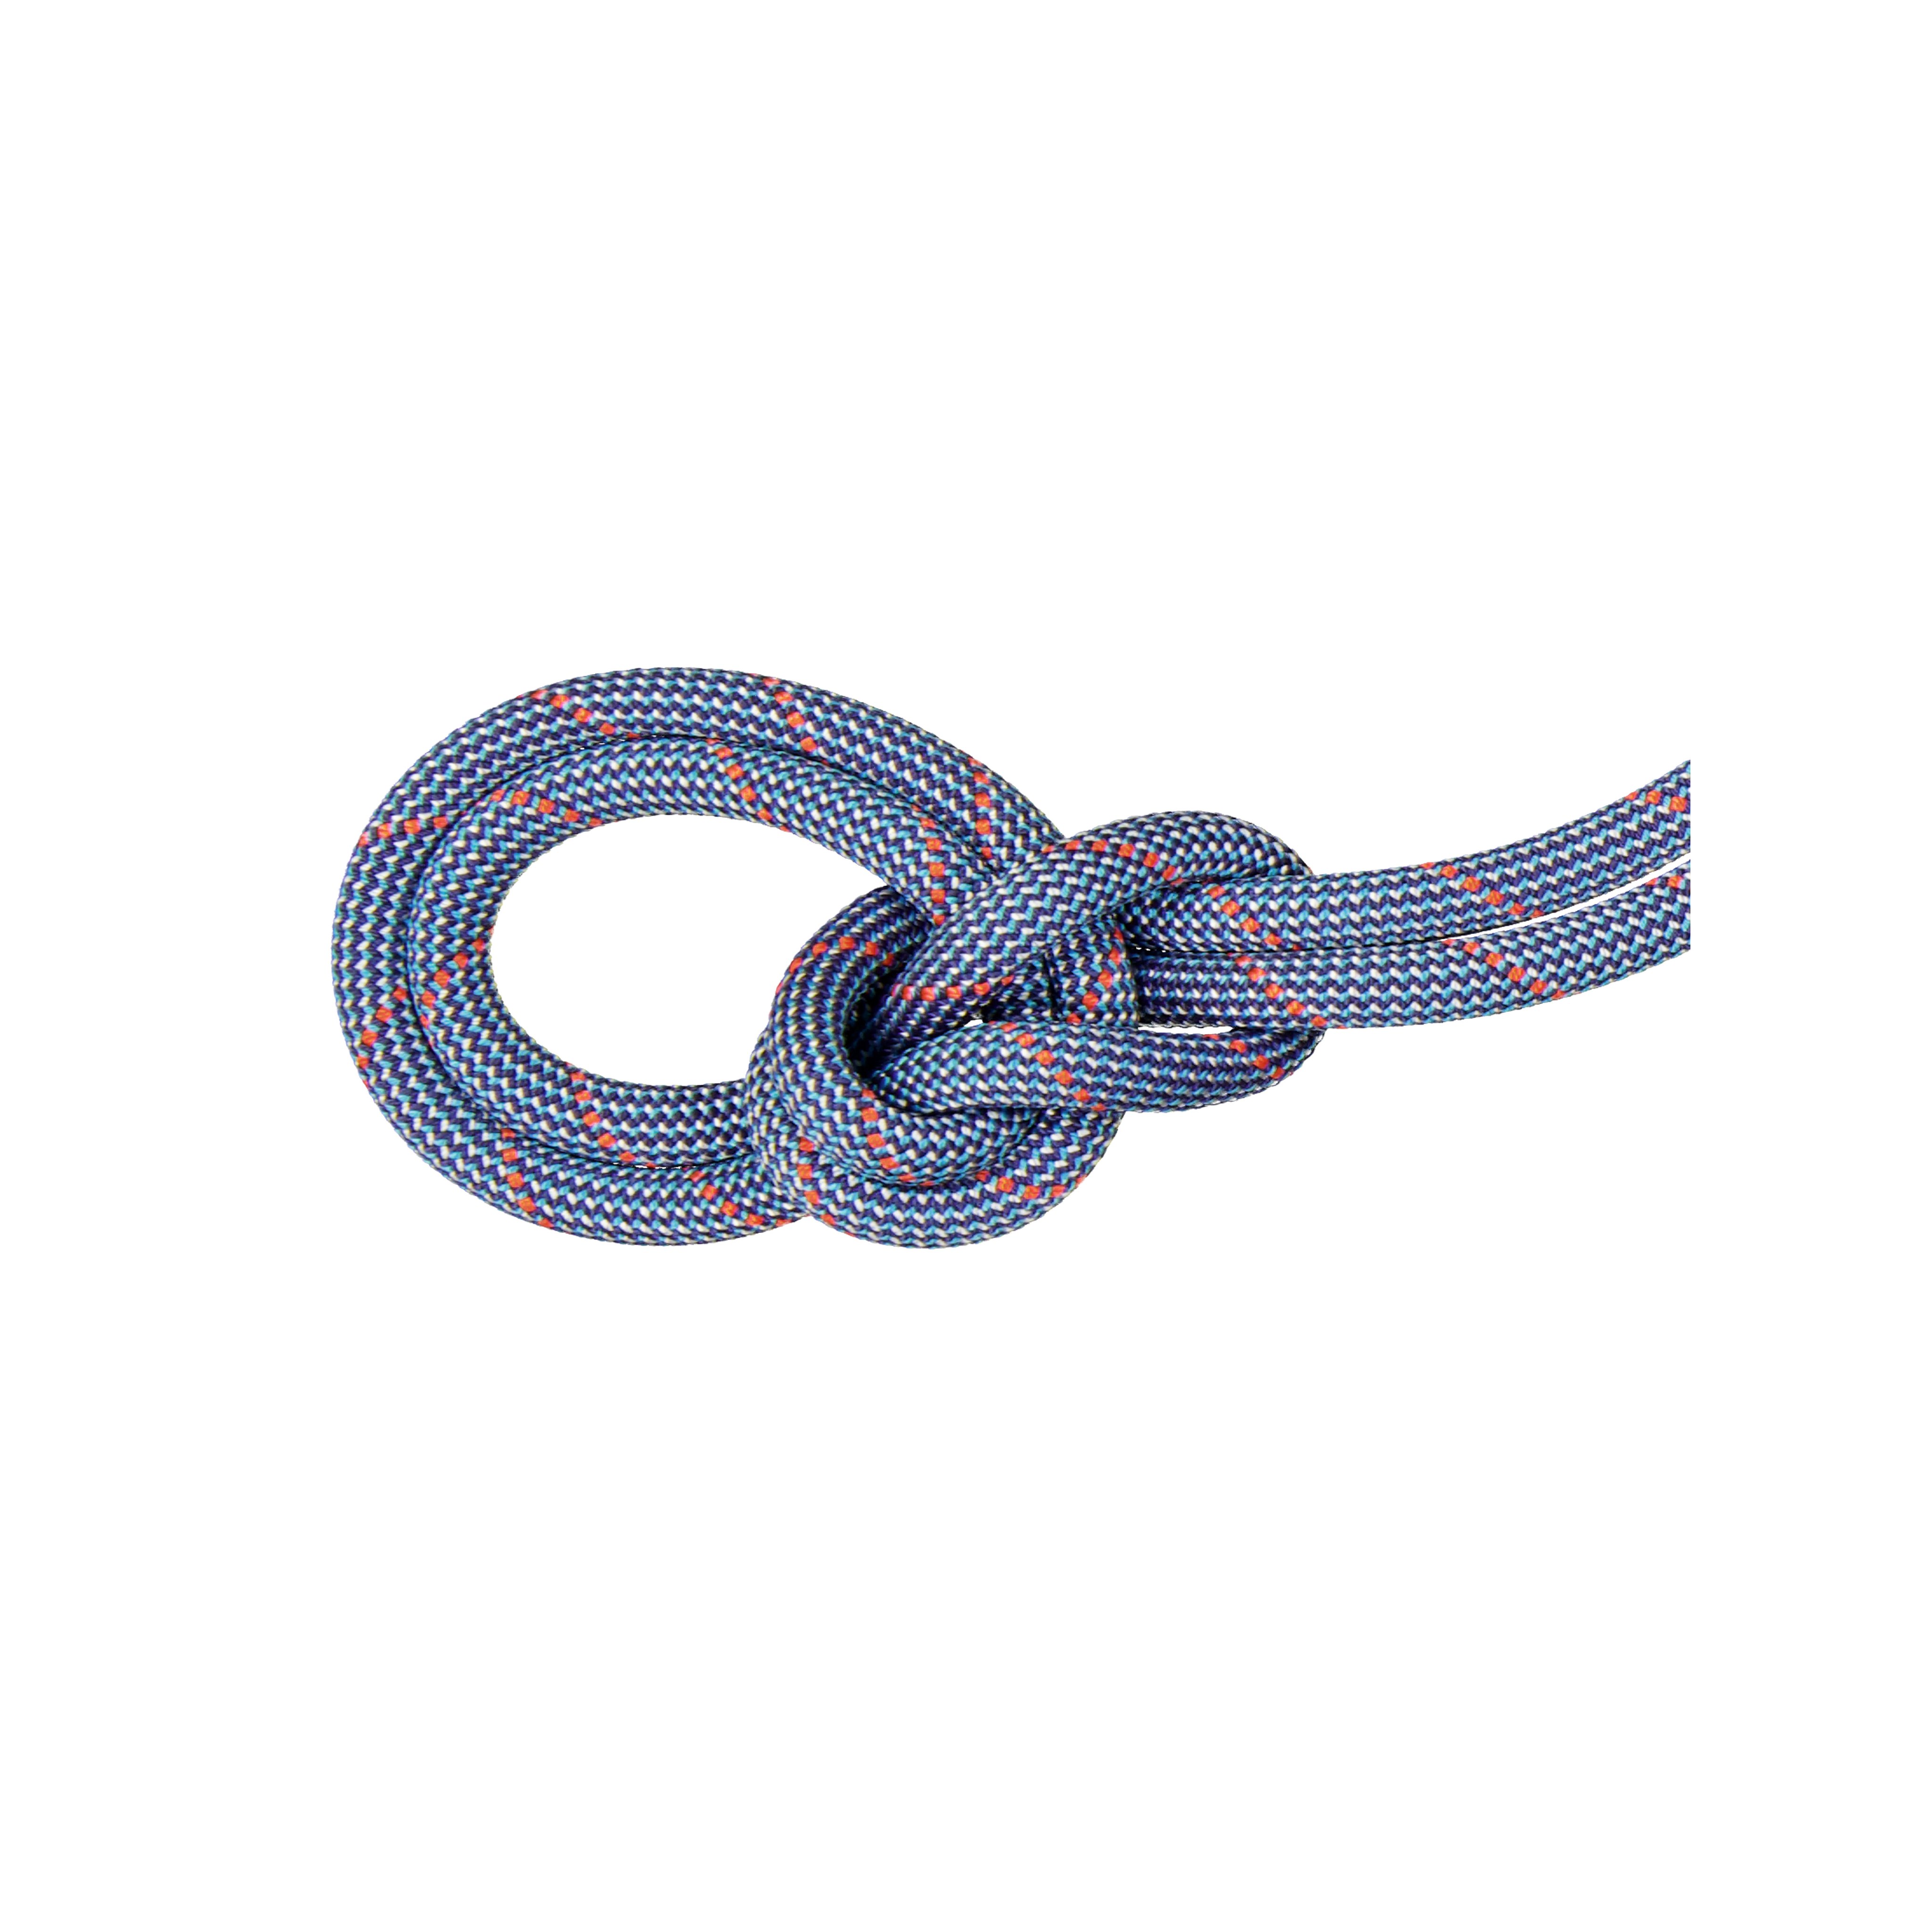 10.2 Crag Classic Rope product image